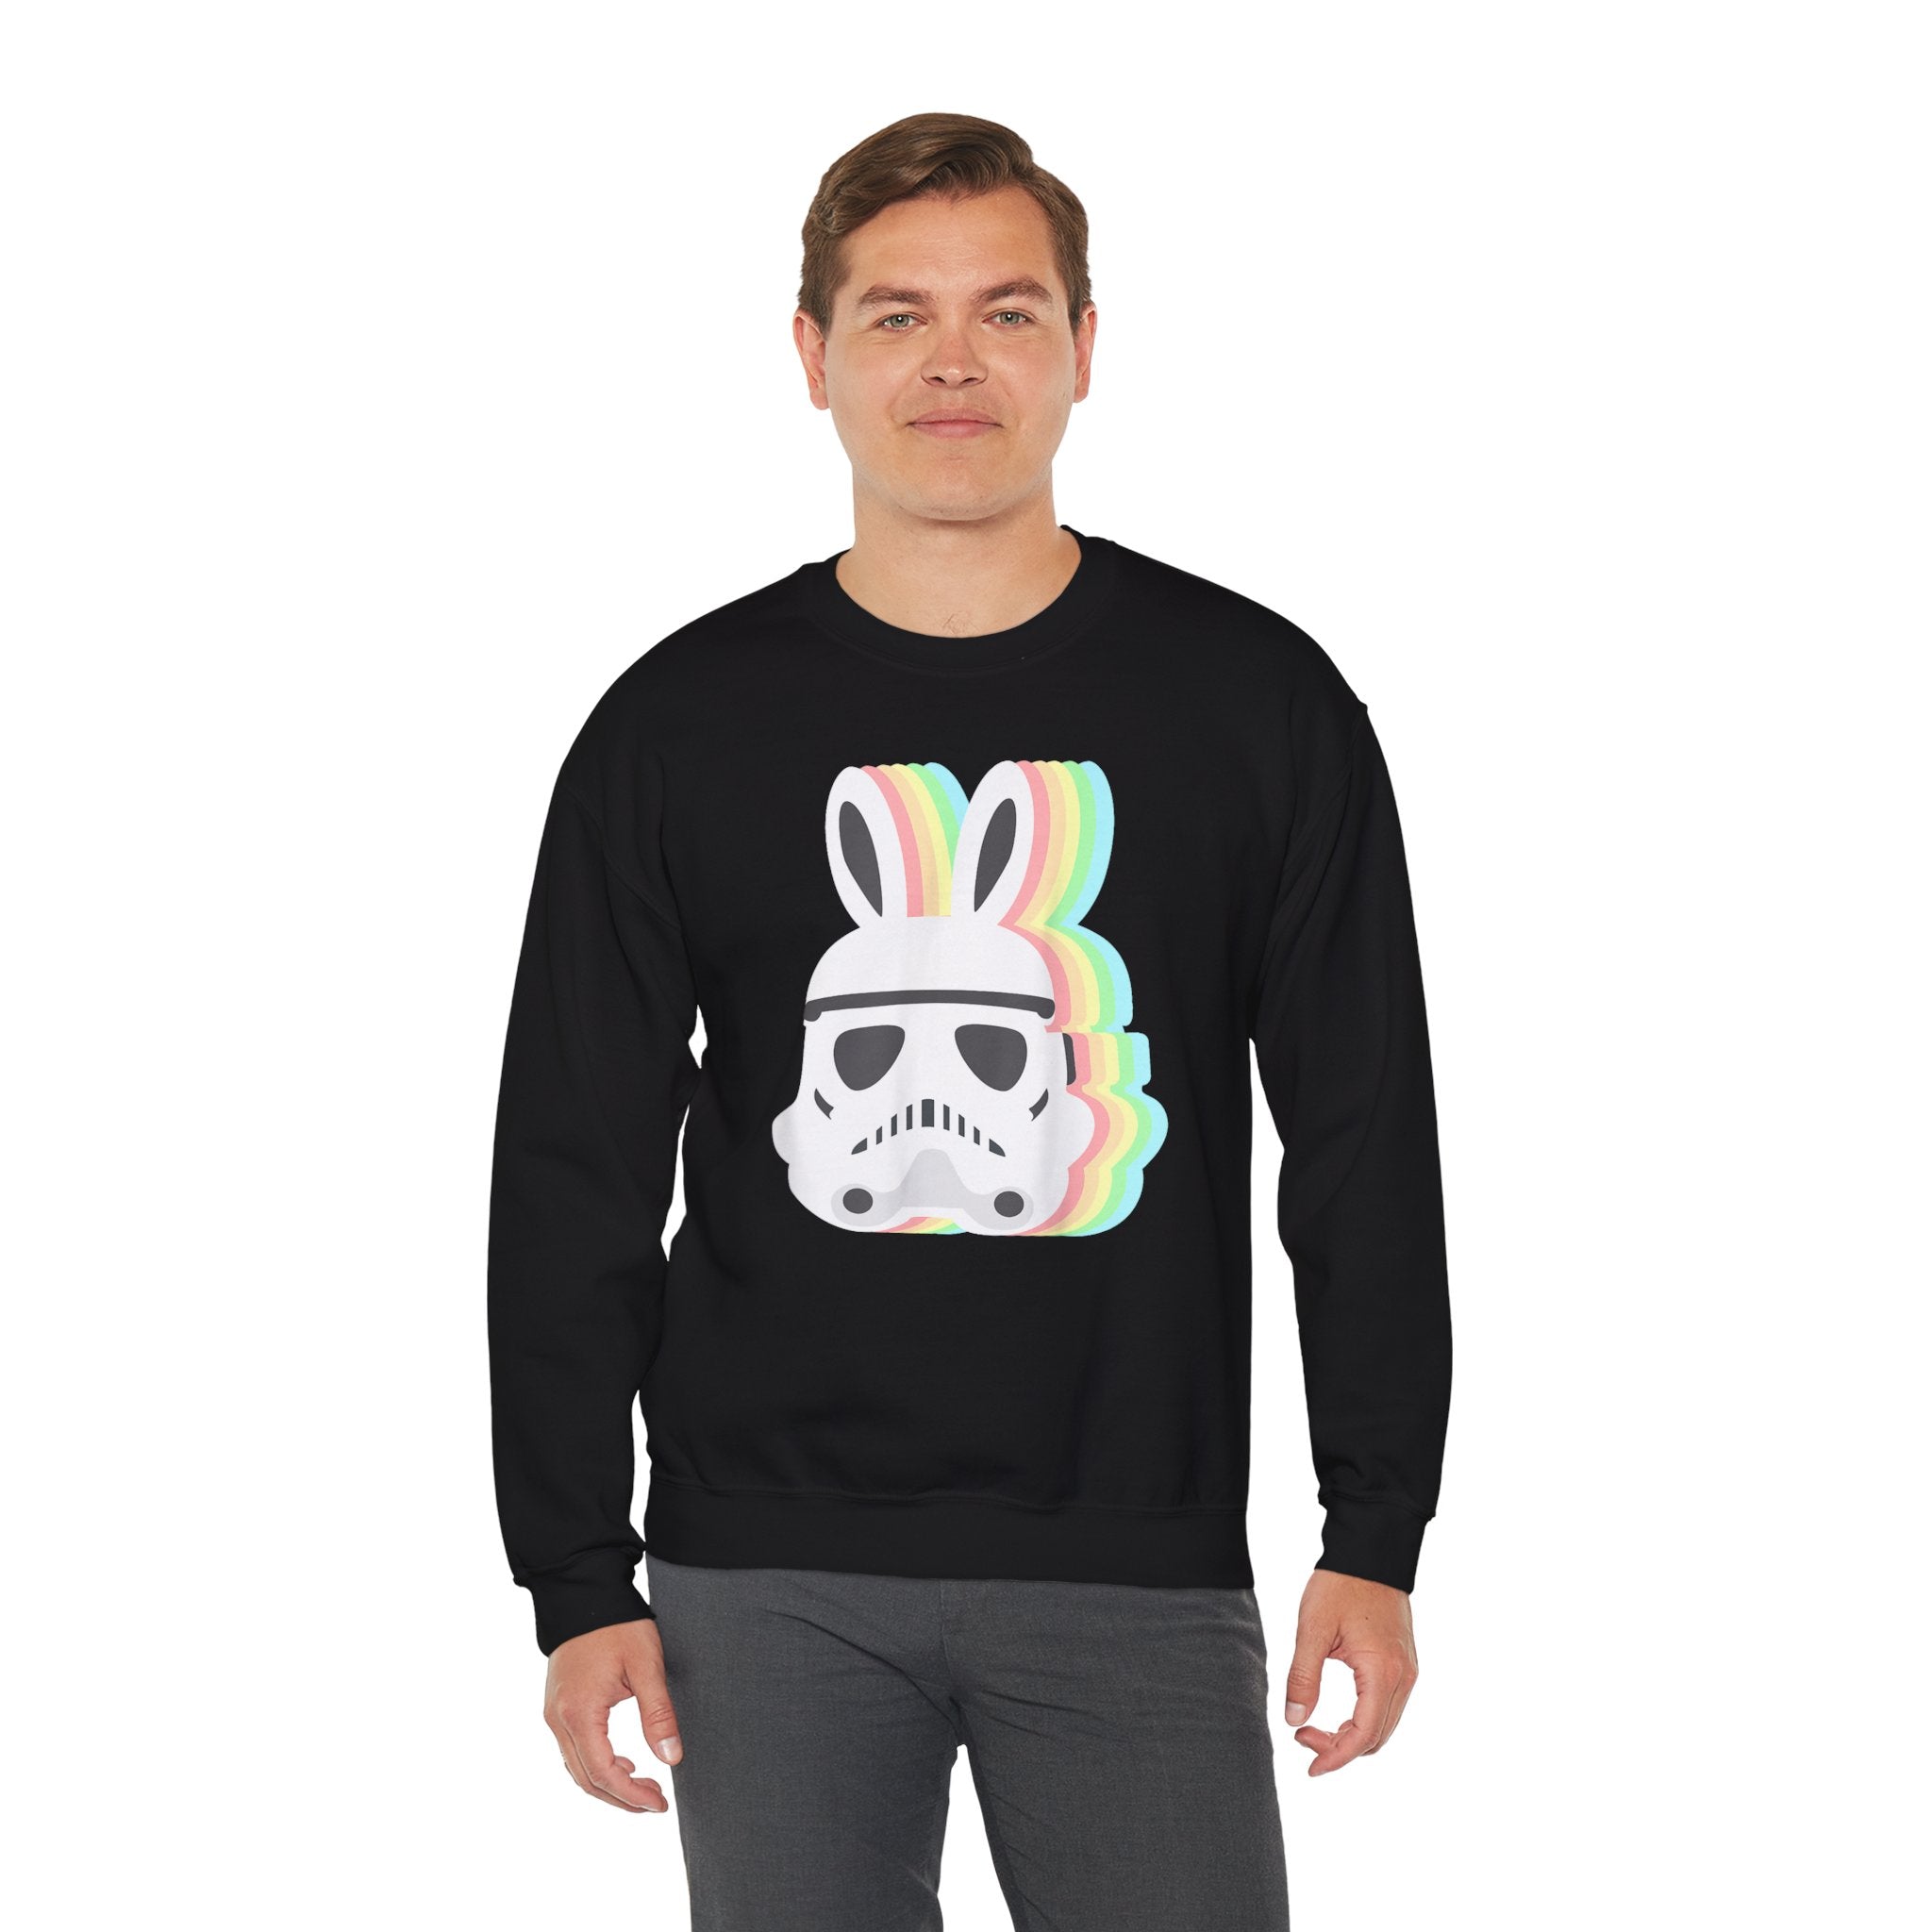 A man wearing a black Star Wars Easter Stormtrooper - Sweatshirt, with its helmet adorned with rainbow bunny ears.